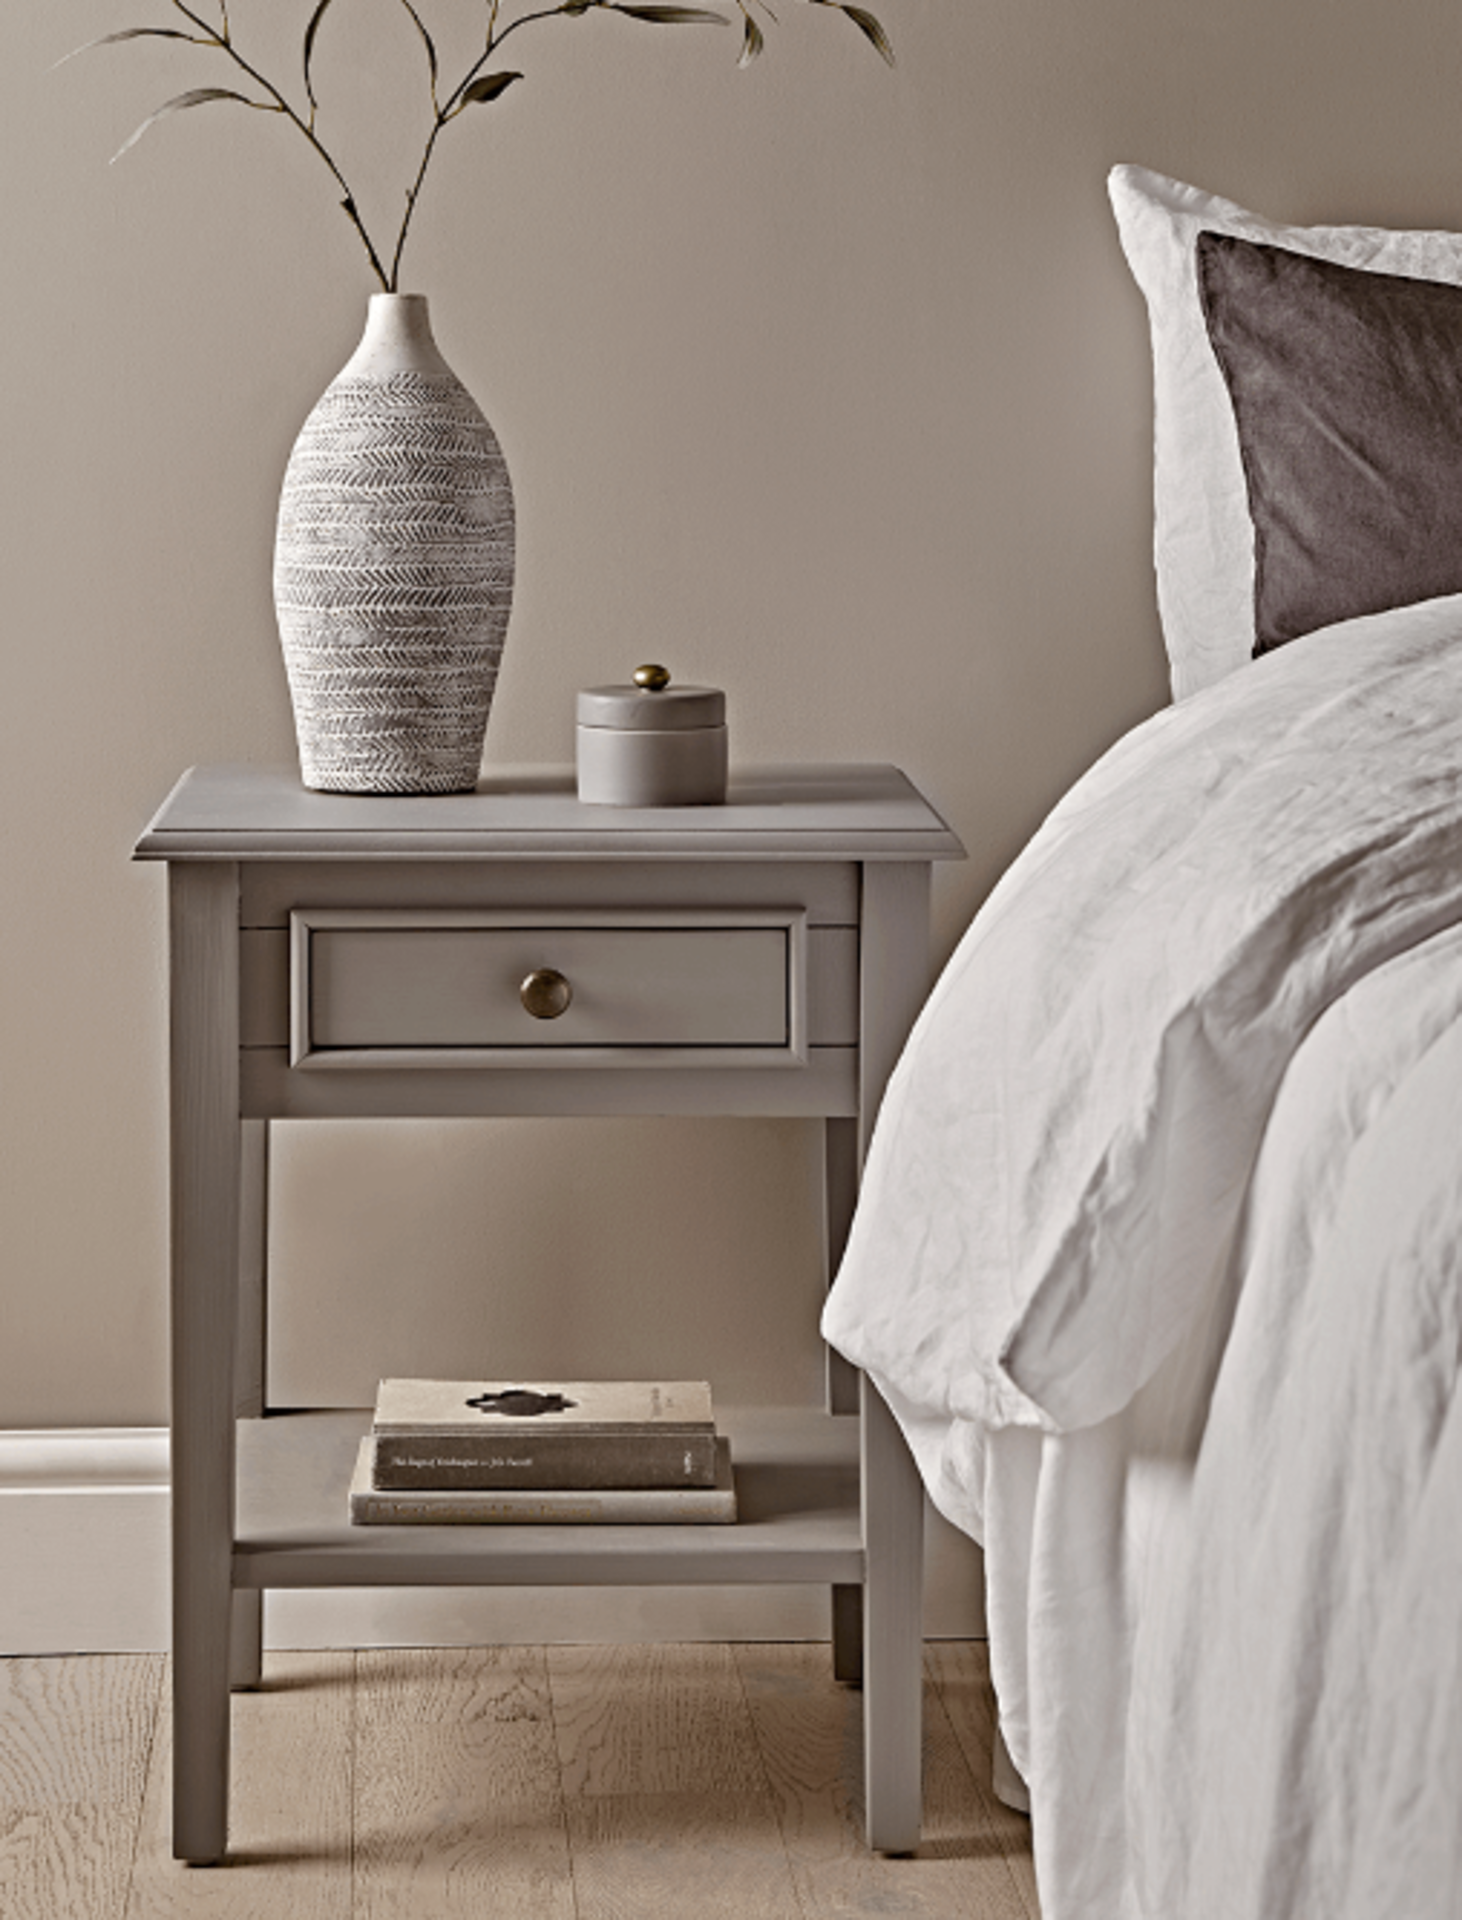 Cox & Cox Camille Bedside Table - Grey. RRP £455.00. With a warm grey painted finish and a slender